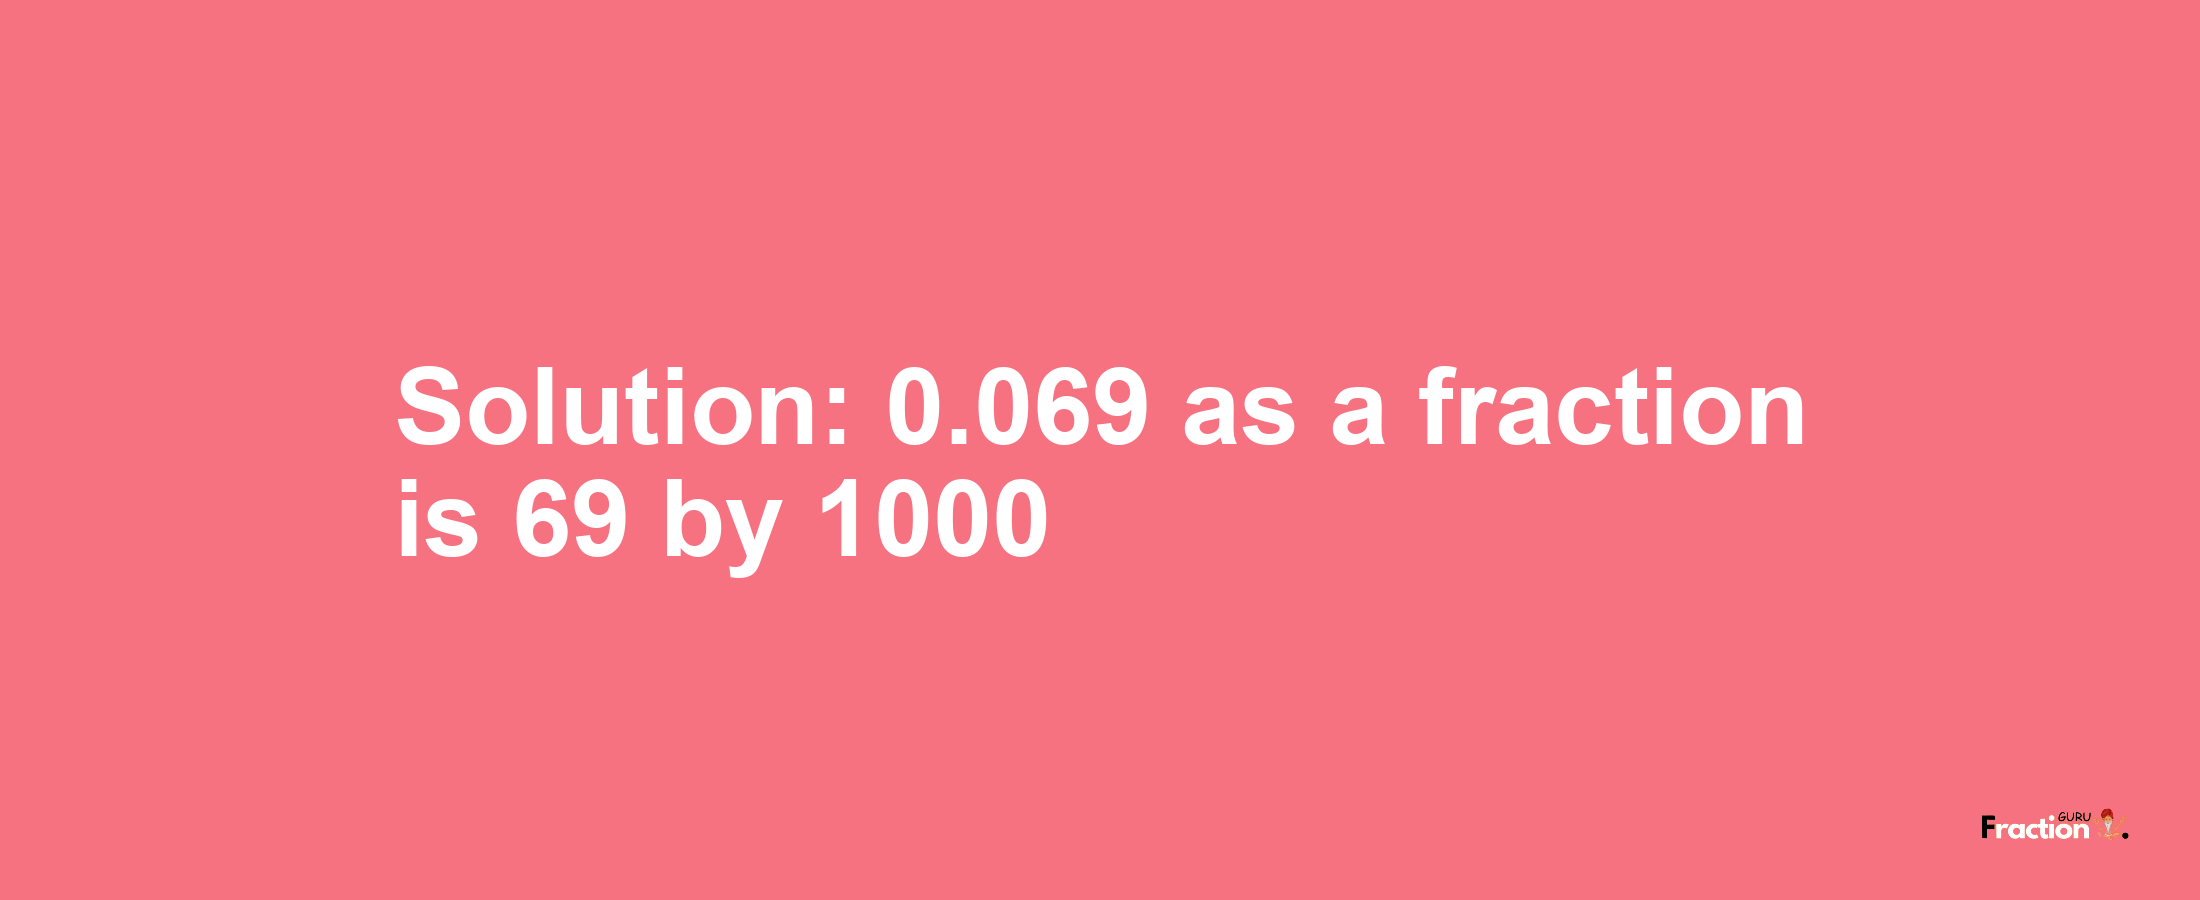 Solution:0.069 as a fraction is 69/1000